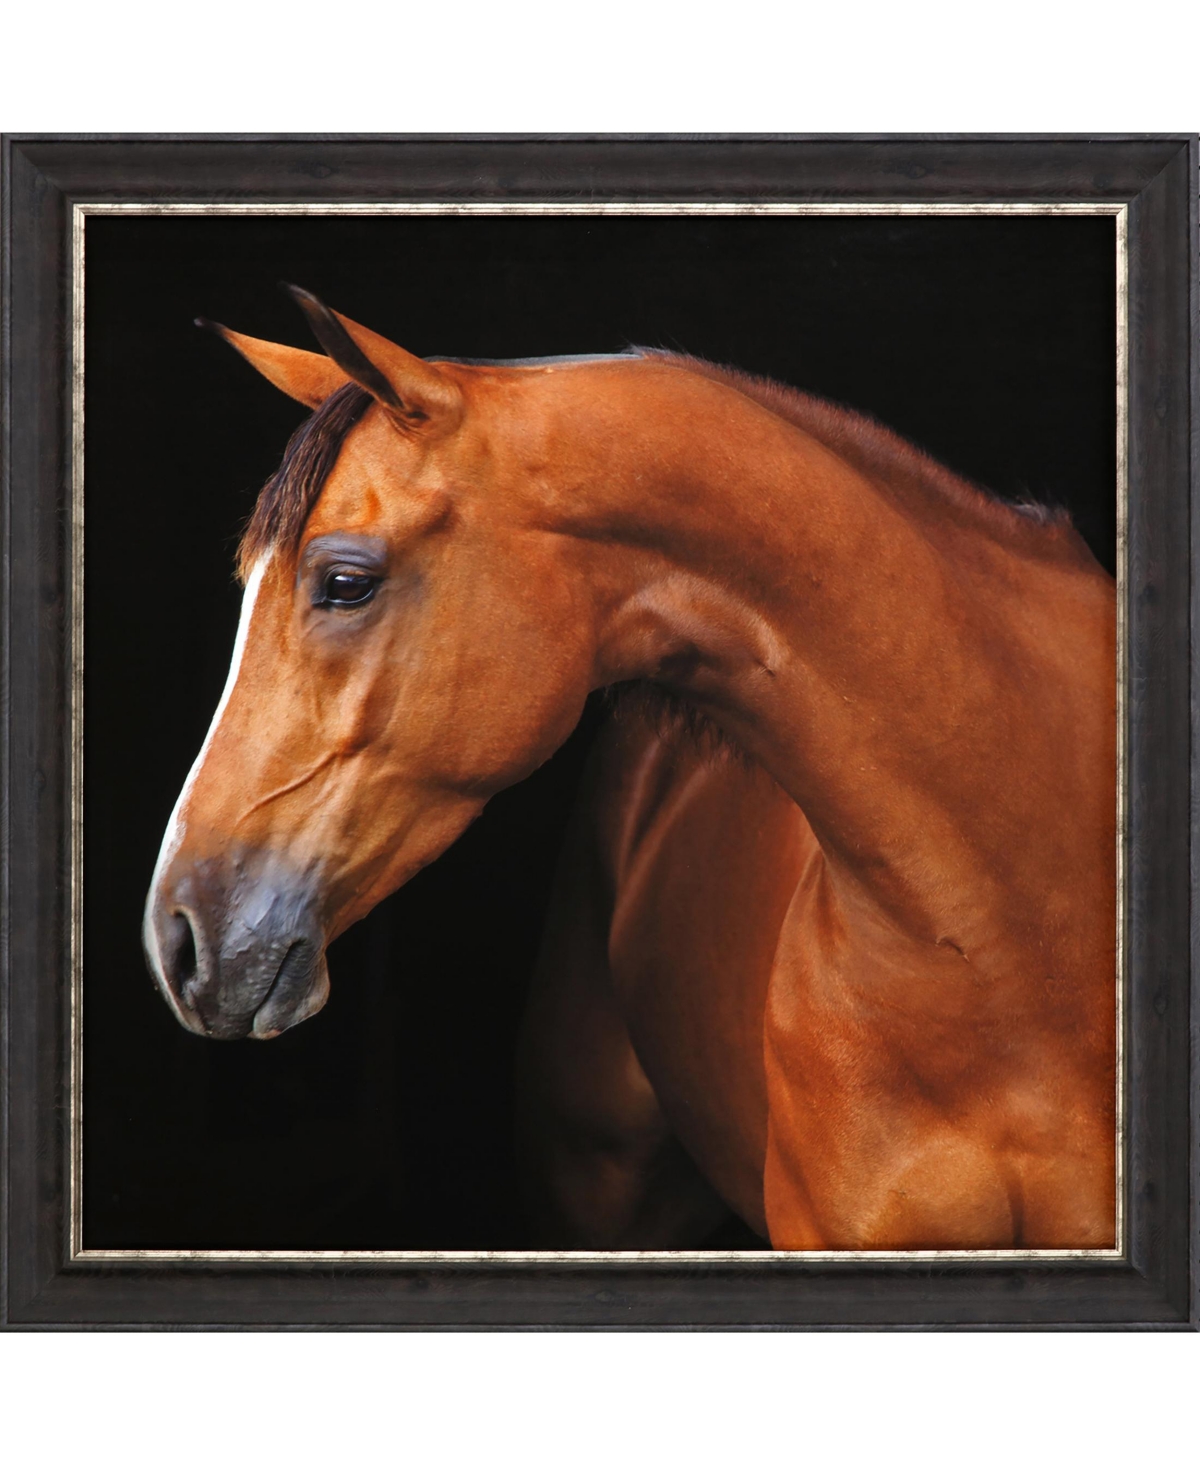 Paragon Picture Gallery Jack The Horse Framed Art In Brown